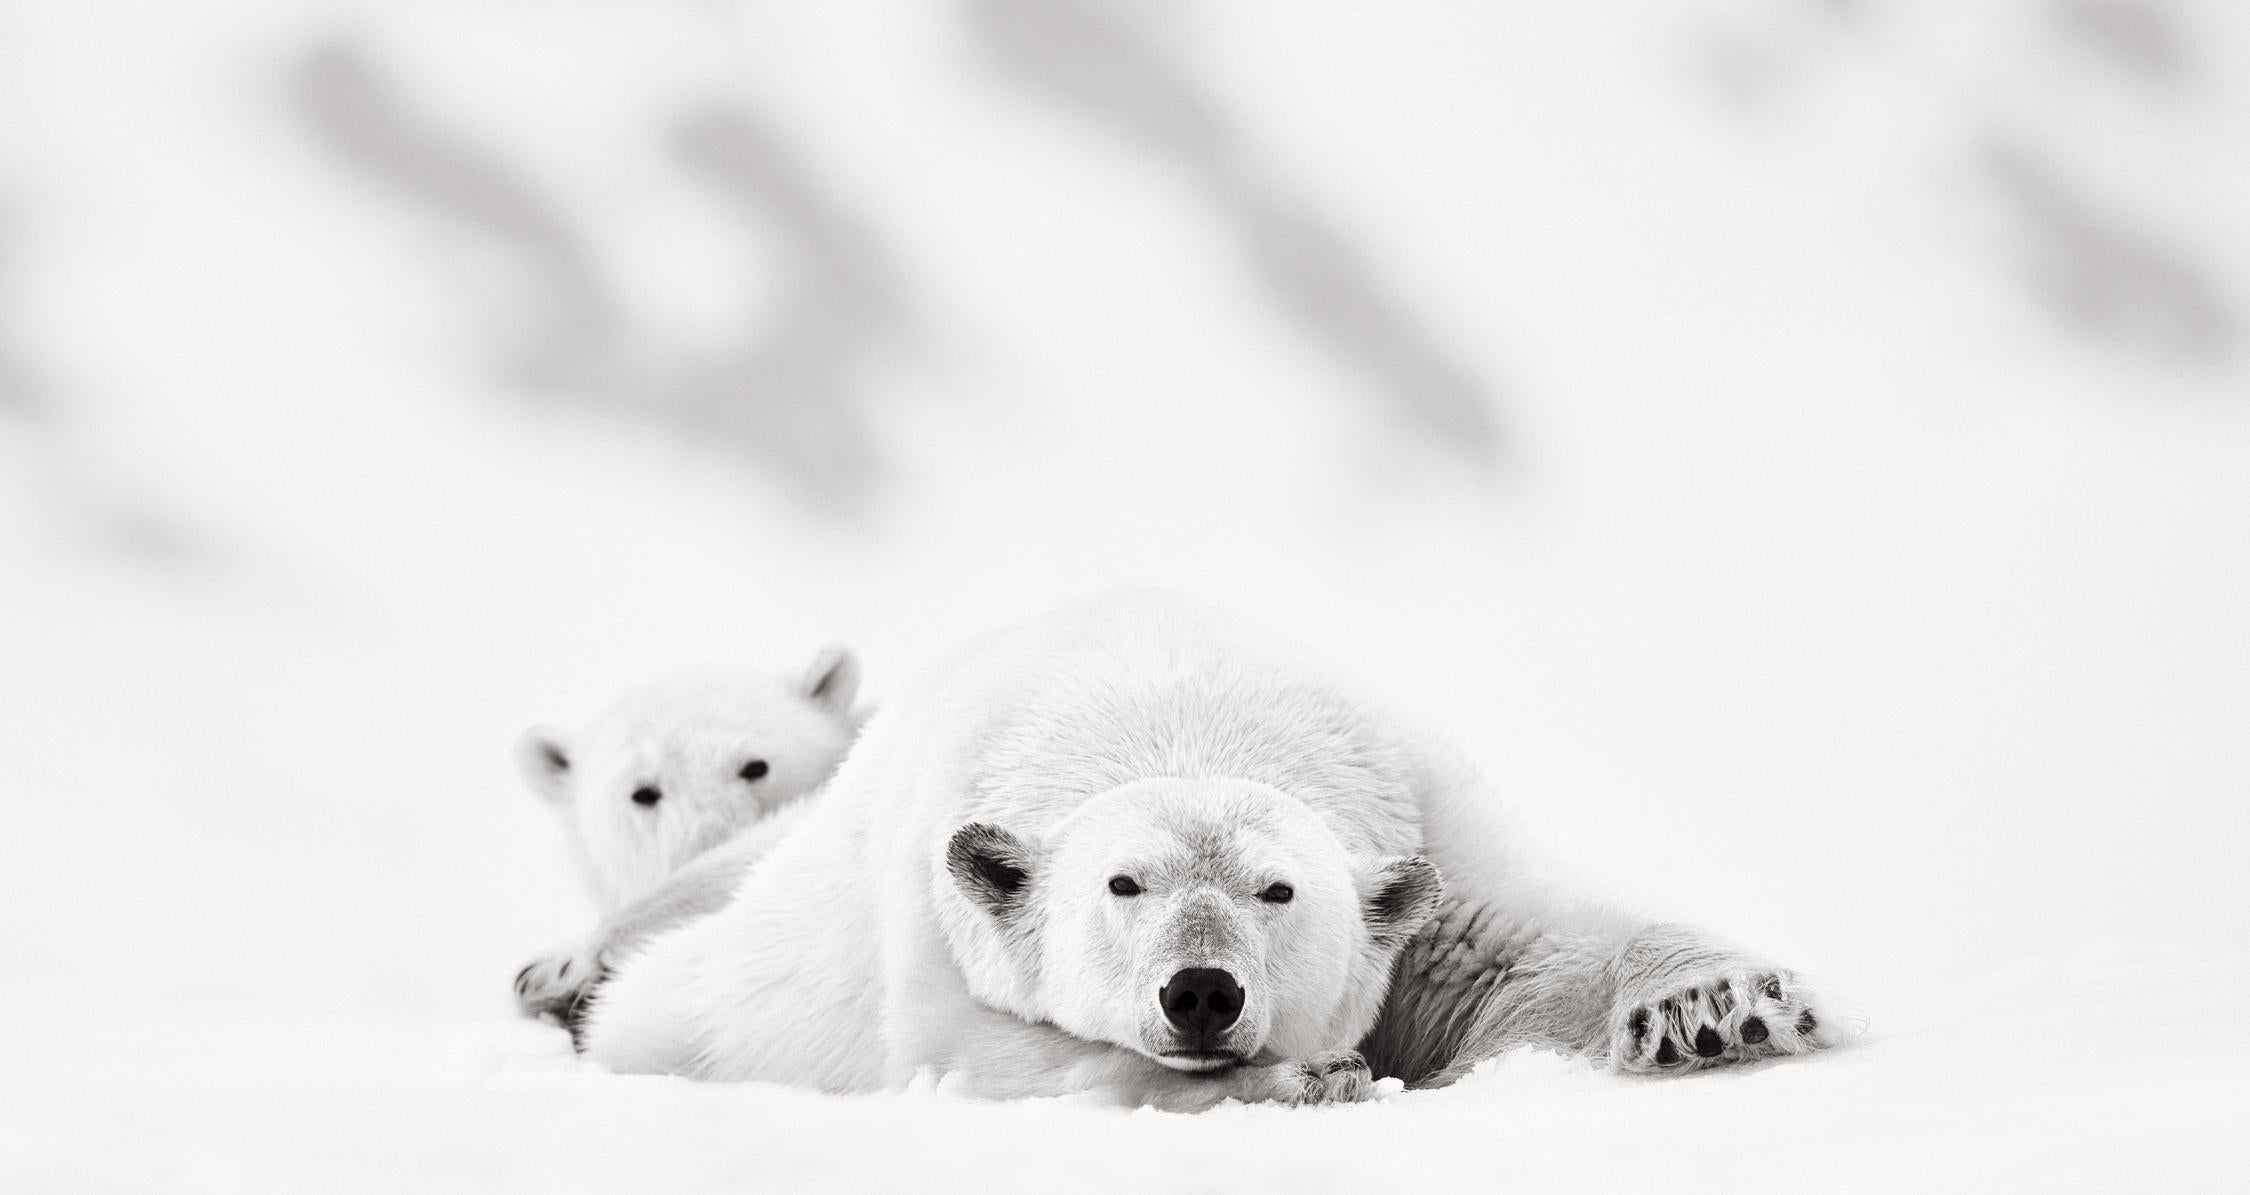 Drew Doggett Black and White Photograph - Mother and Cub Polar Bears Rest, Surreal Black & White Photography, Wildlife